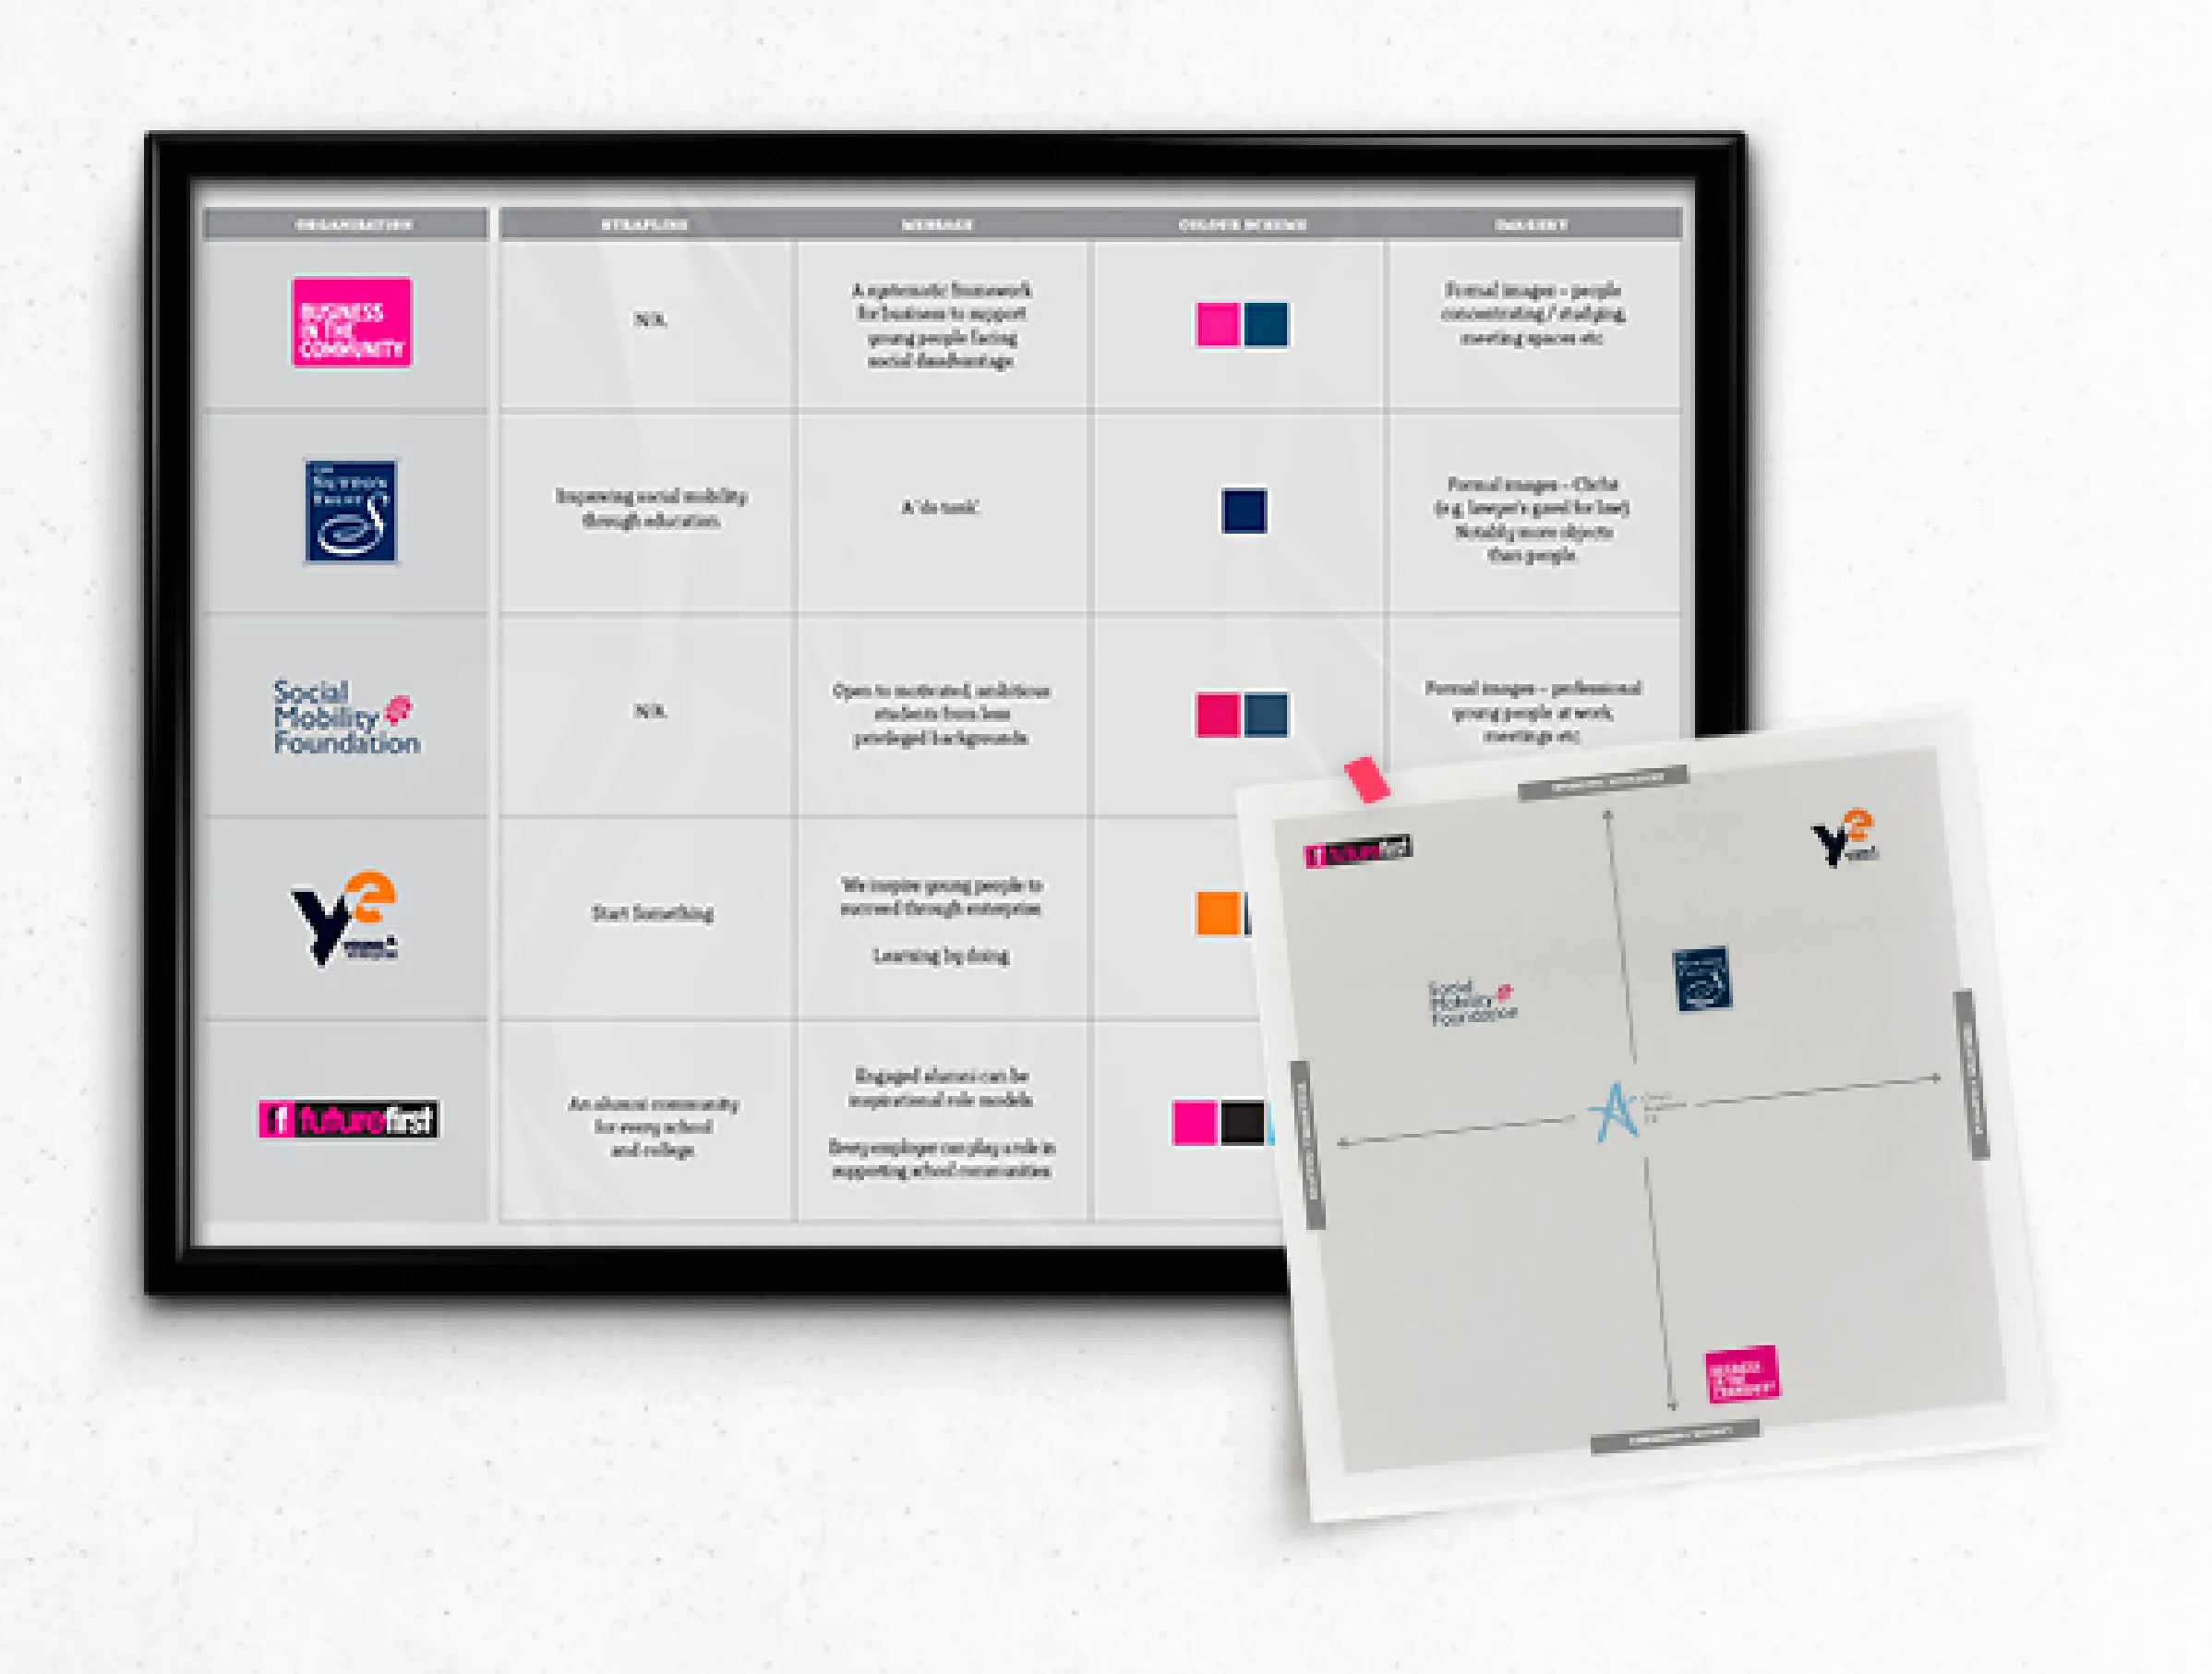 Career Ready competitor mapping as part of Brand Consultancy process